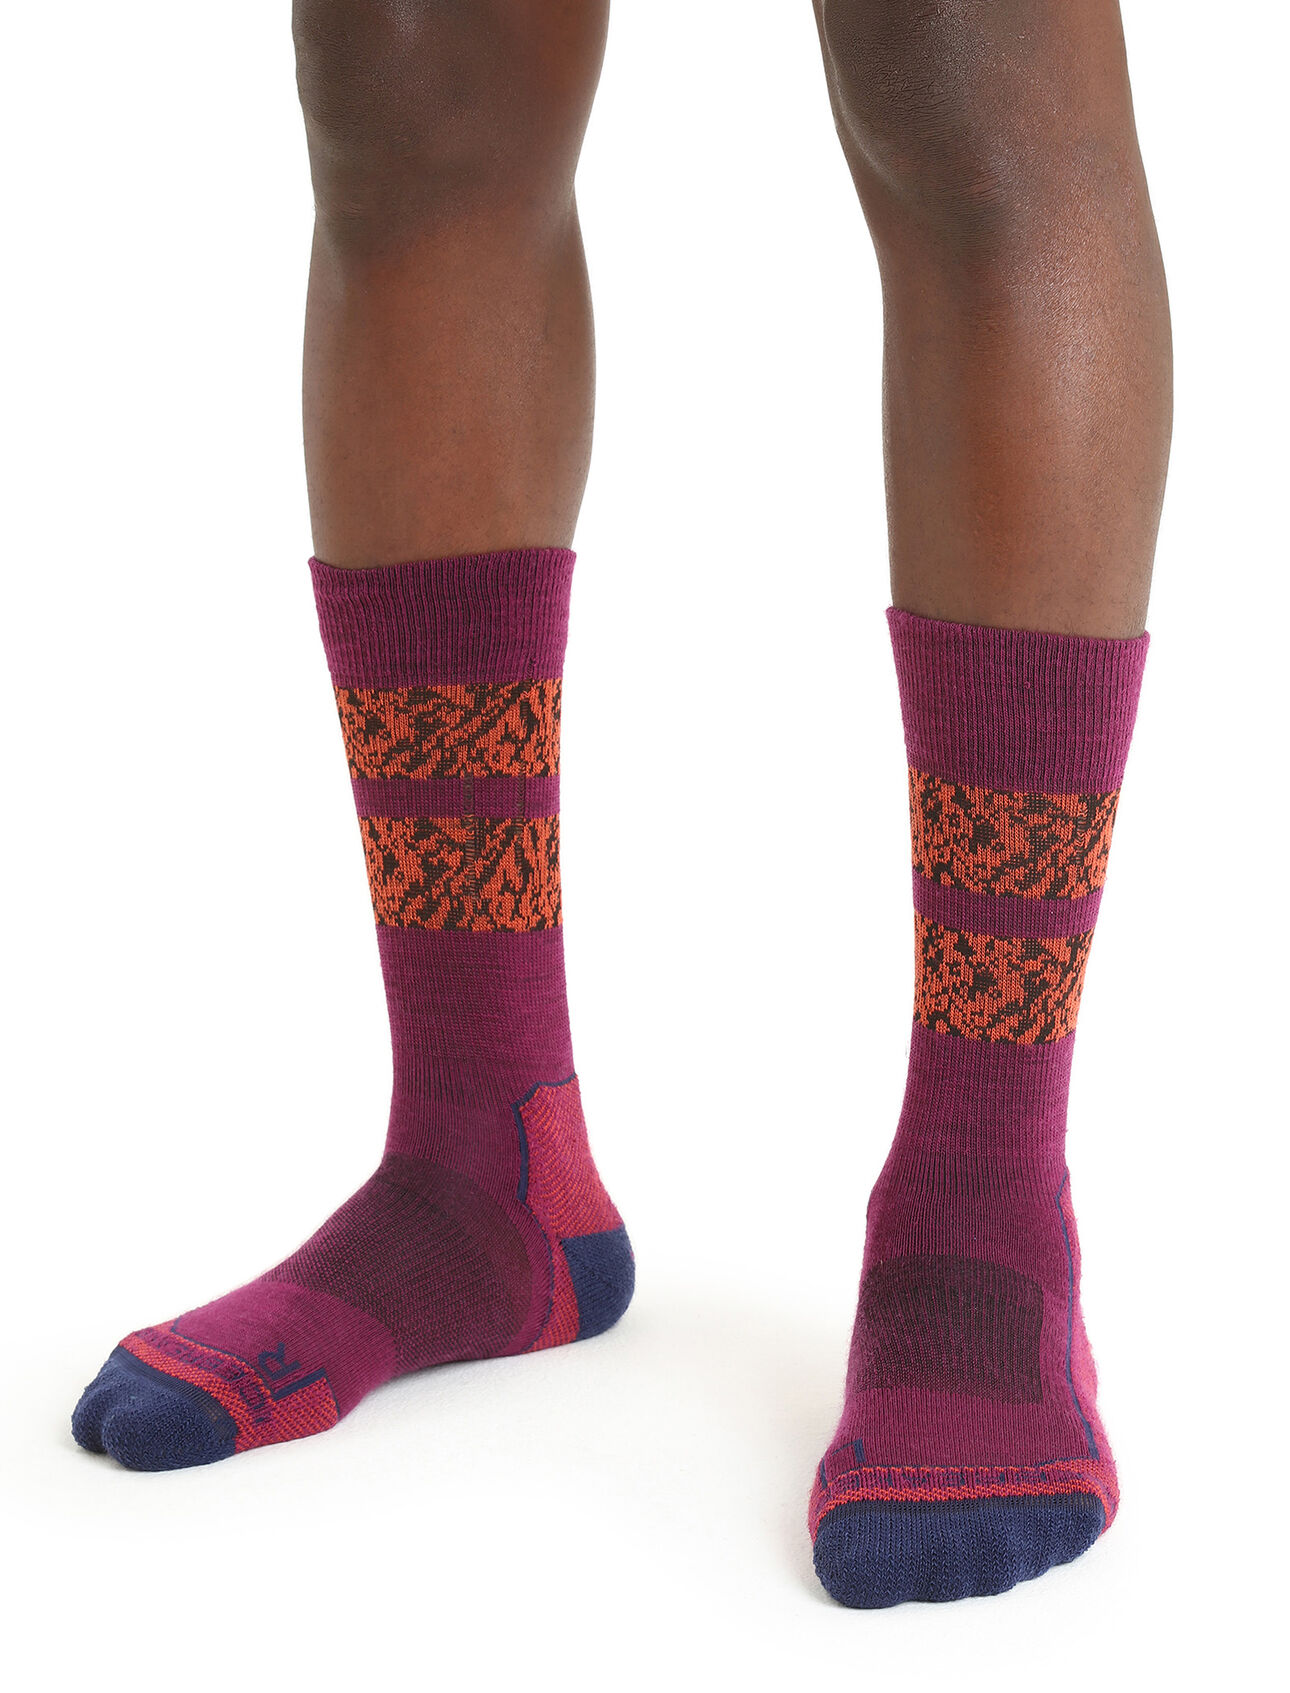 Mens Merino Hike+ Light Crew Natural Summit Socks Durable, crew-length merino wool socks that are stretchy, breathable, and naturally odor-resistant with full cushion, the Hike+ Light Crew Natural Summit socks feature an anatomical sculpted design for day hikes and backpacking trips.